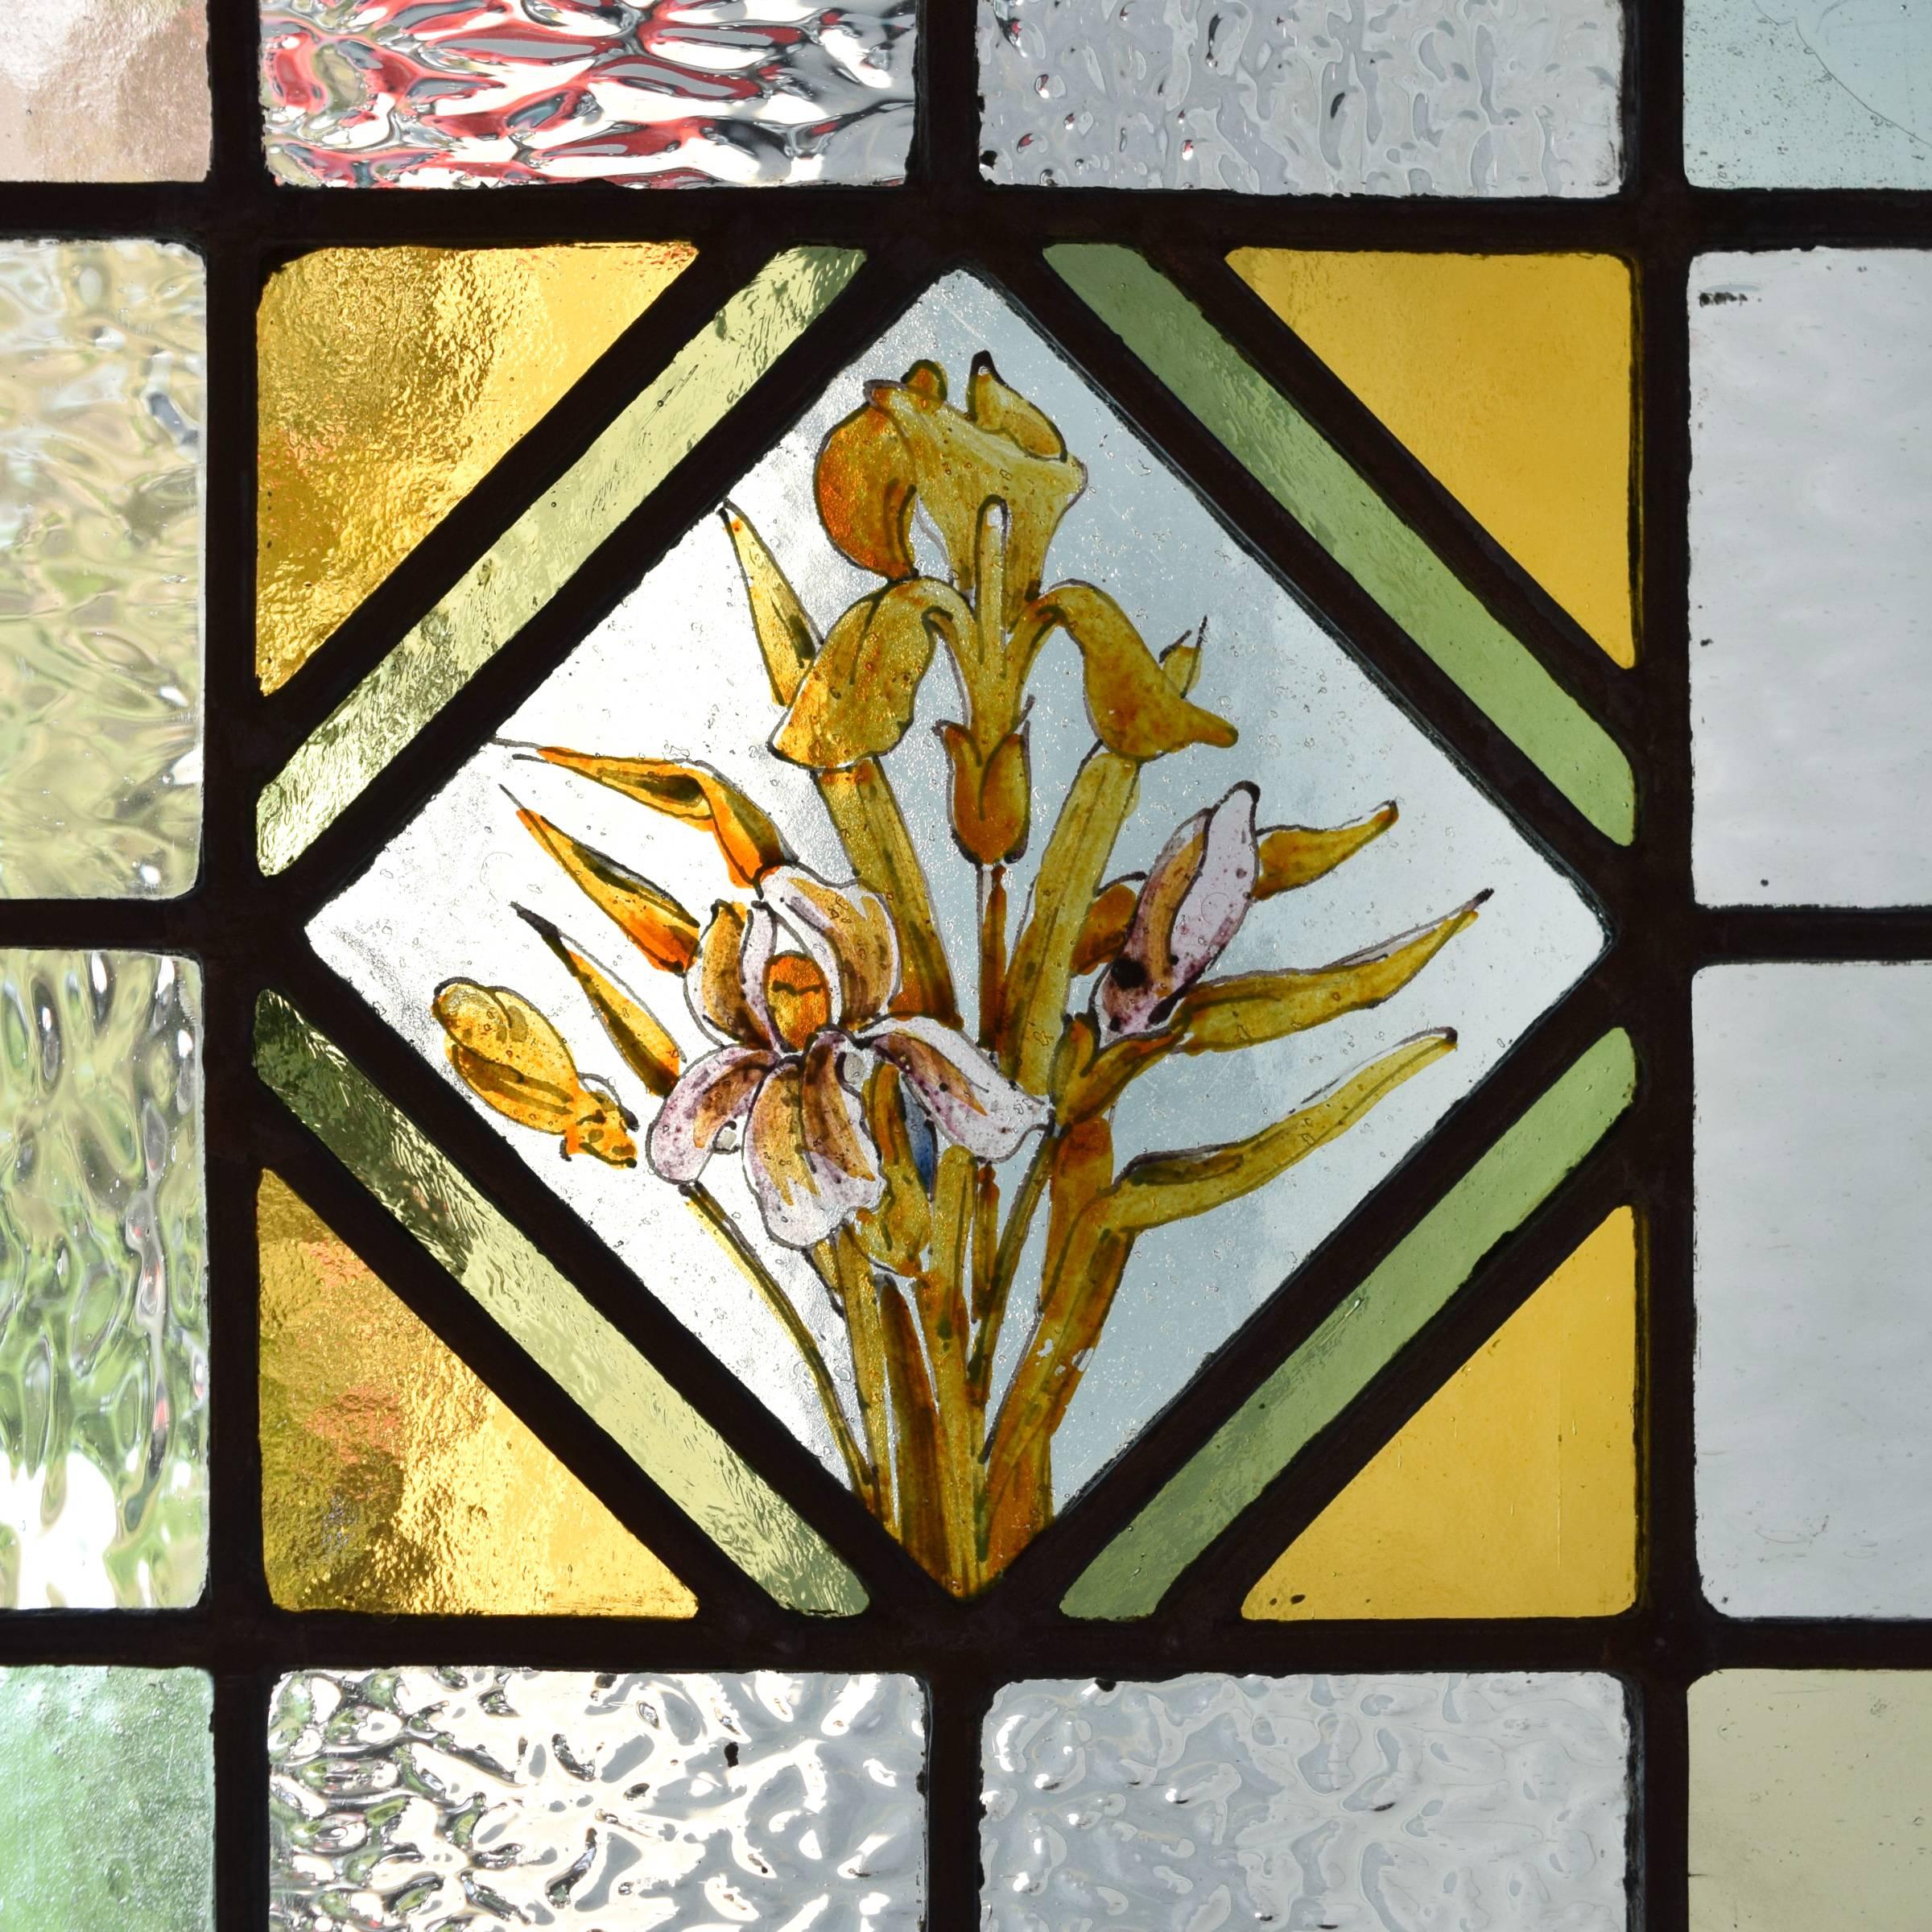 A lovely English art glass window with a central medallion of birds on a branch, flanked by irises and daffodils, circa 1880.